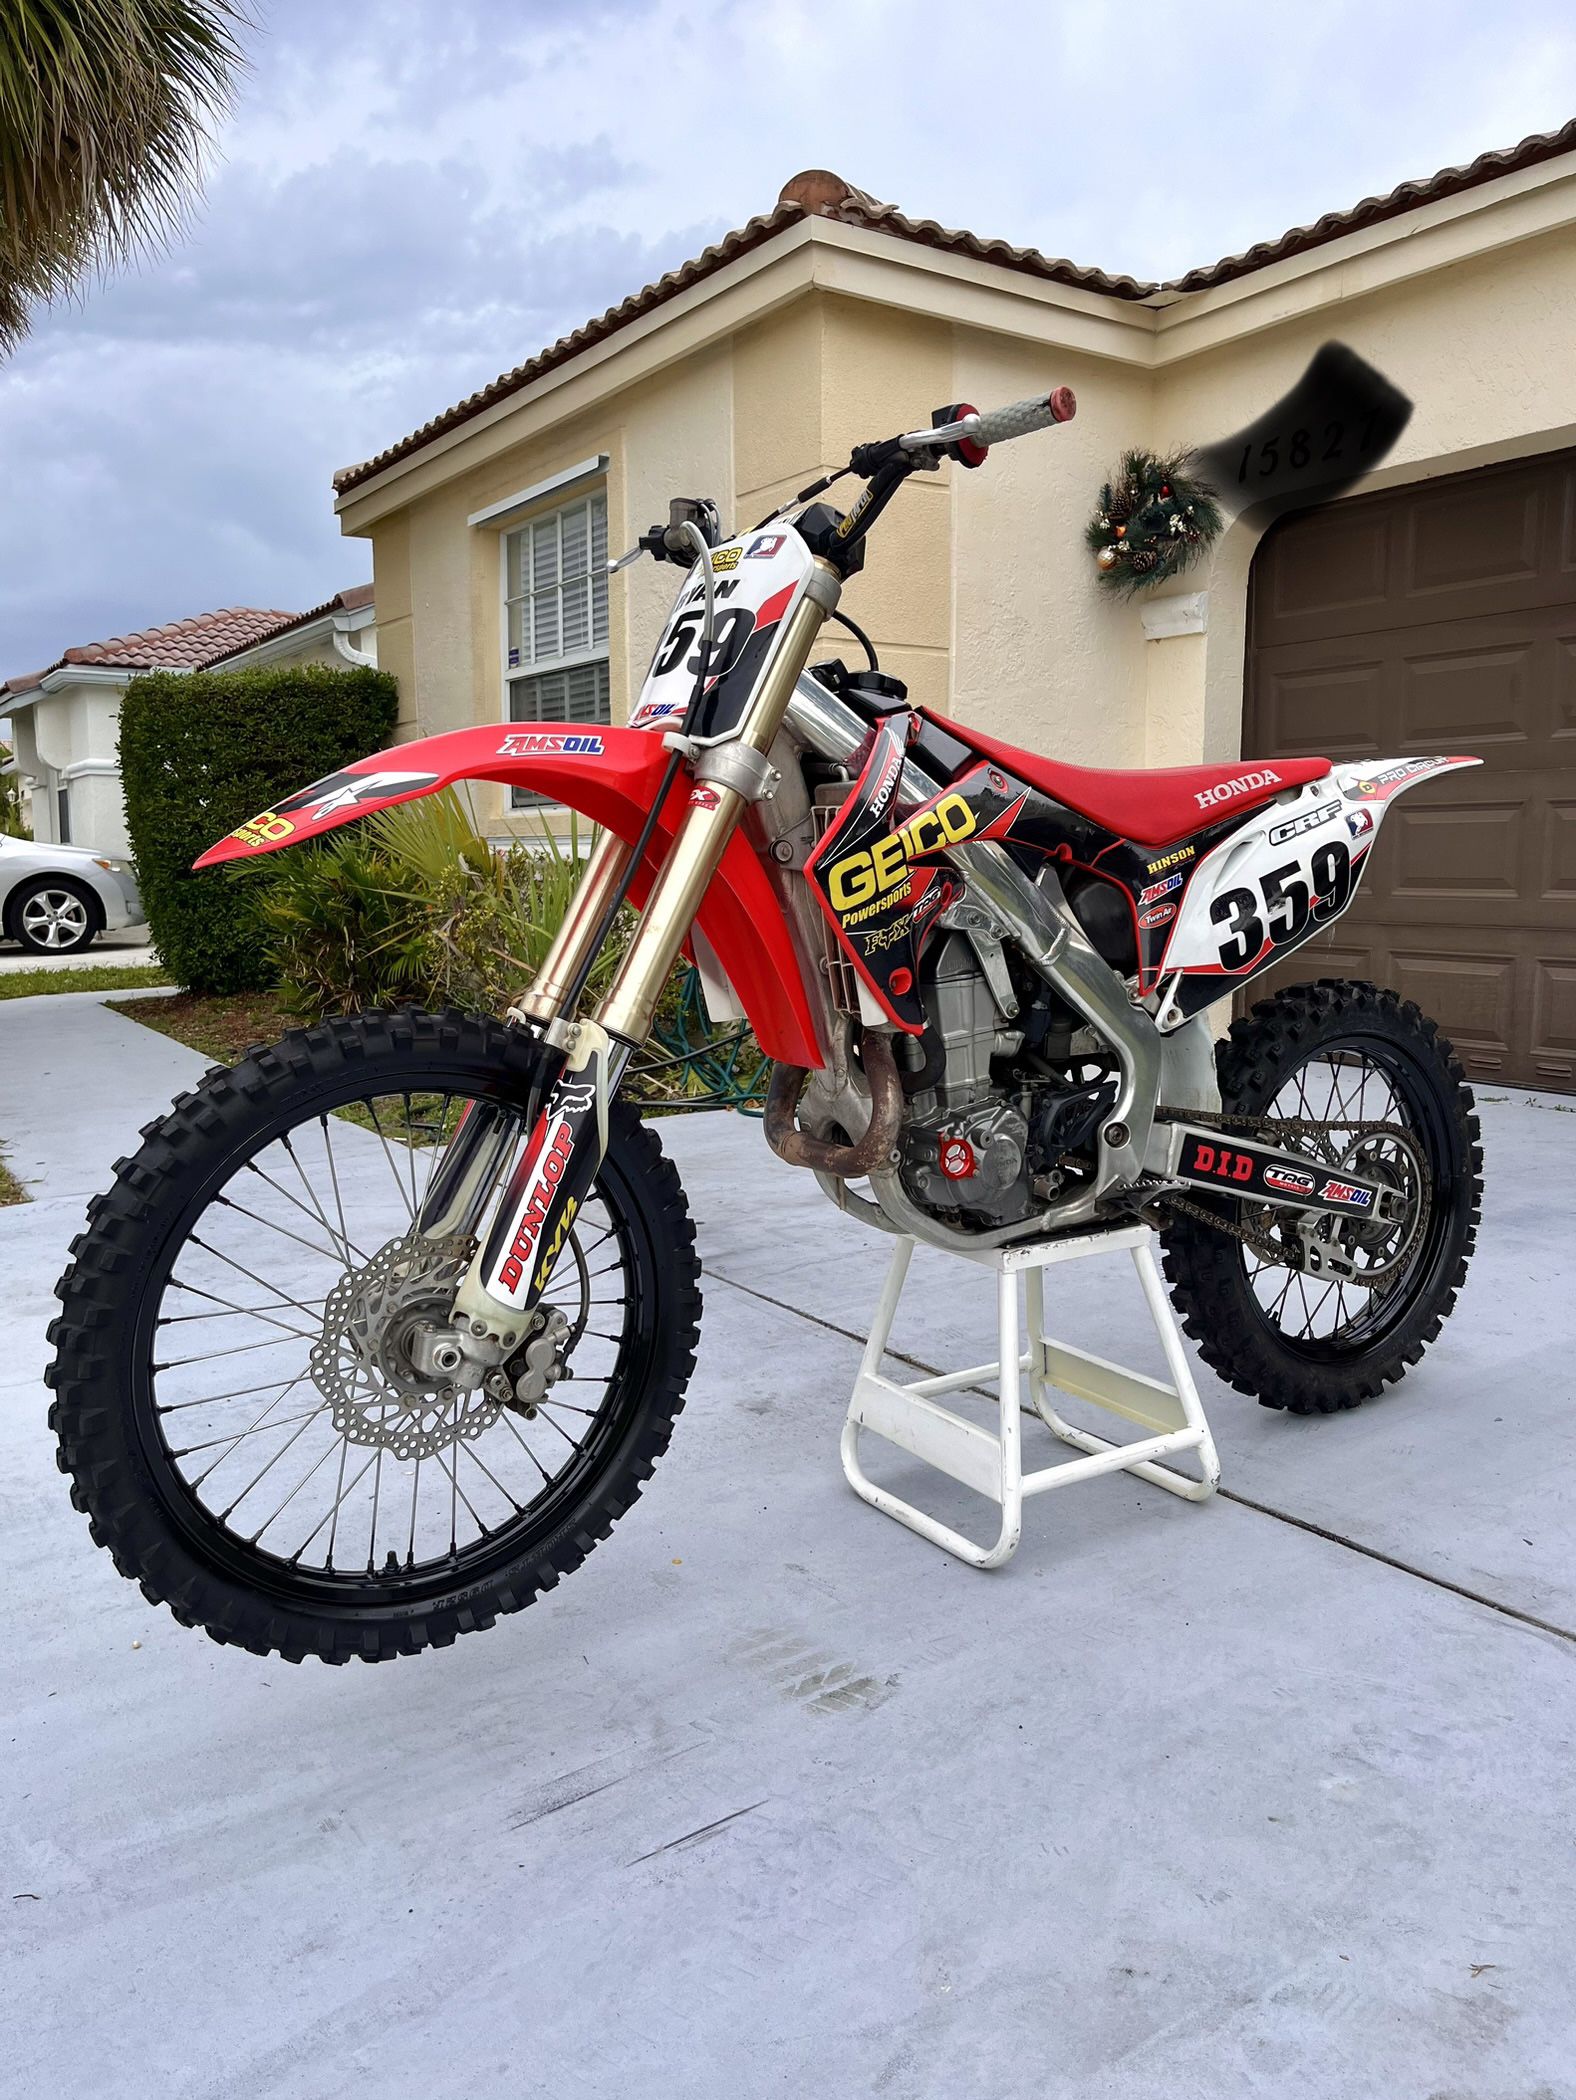 2011 crf450 clean title